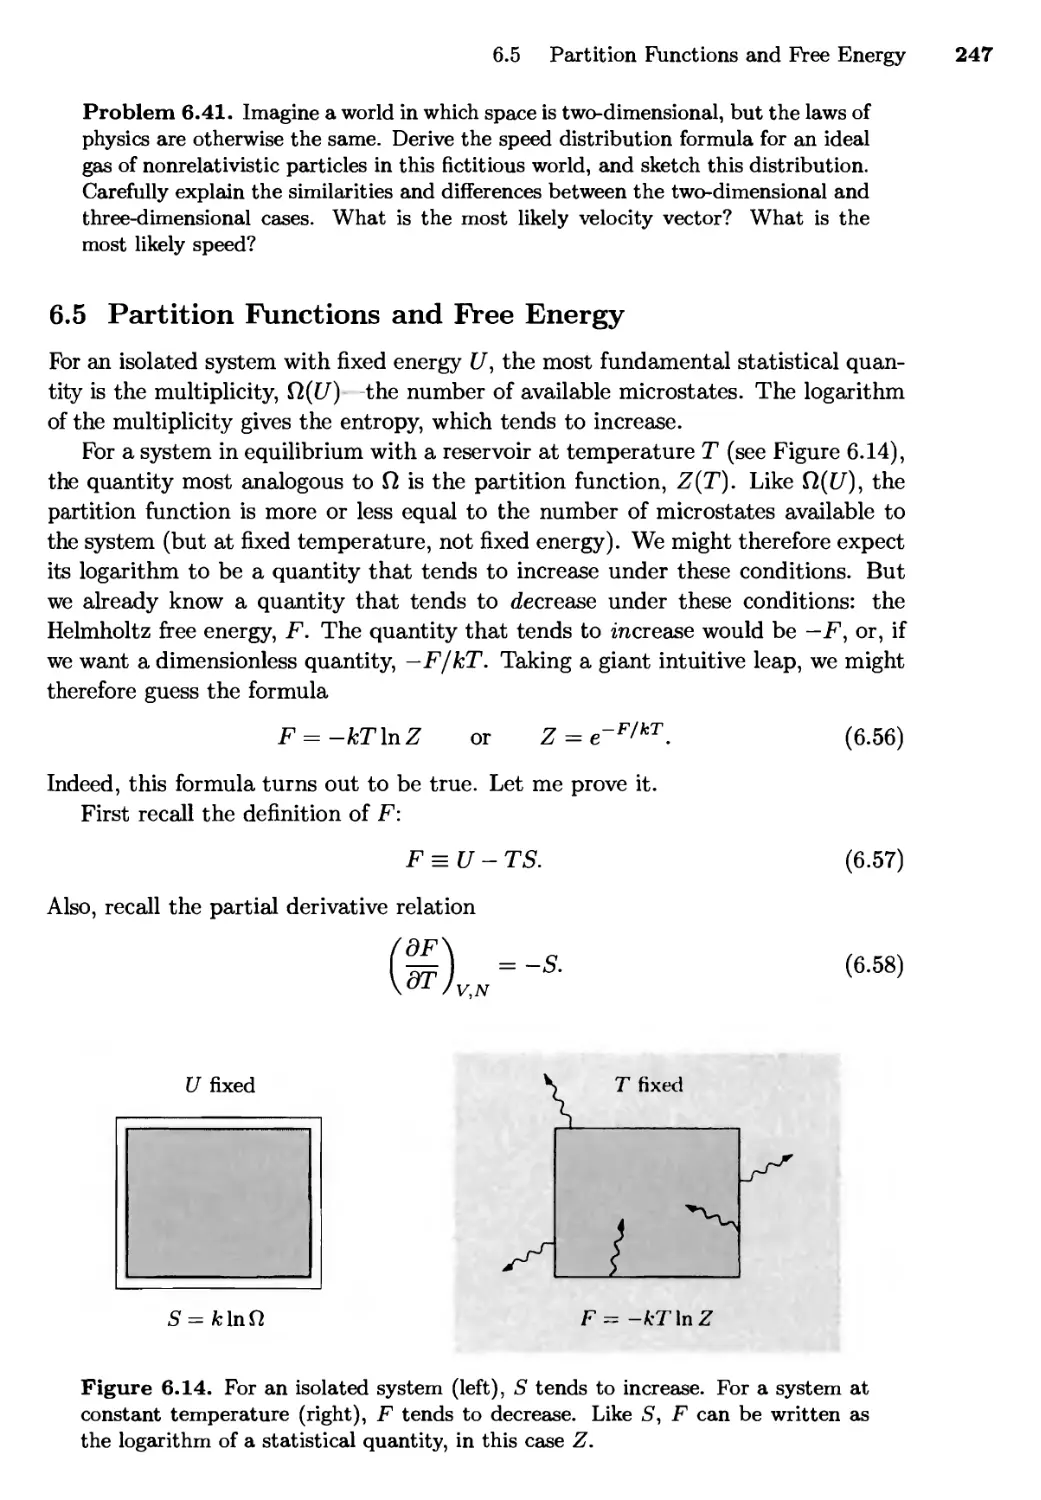 6.5 Partition Functions and Free Energy